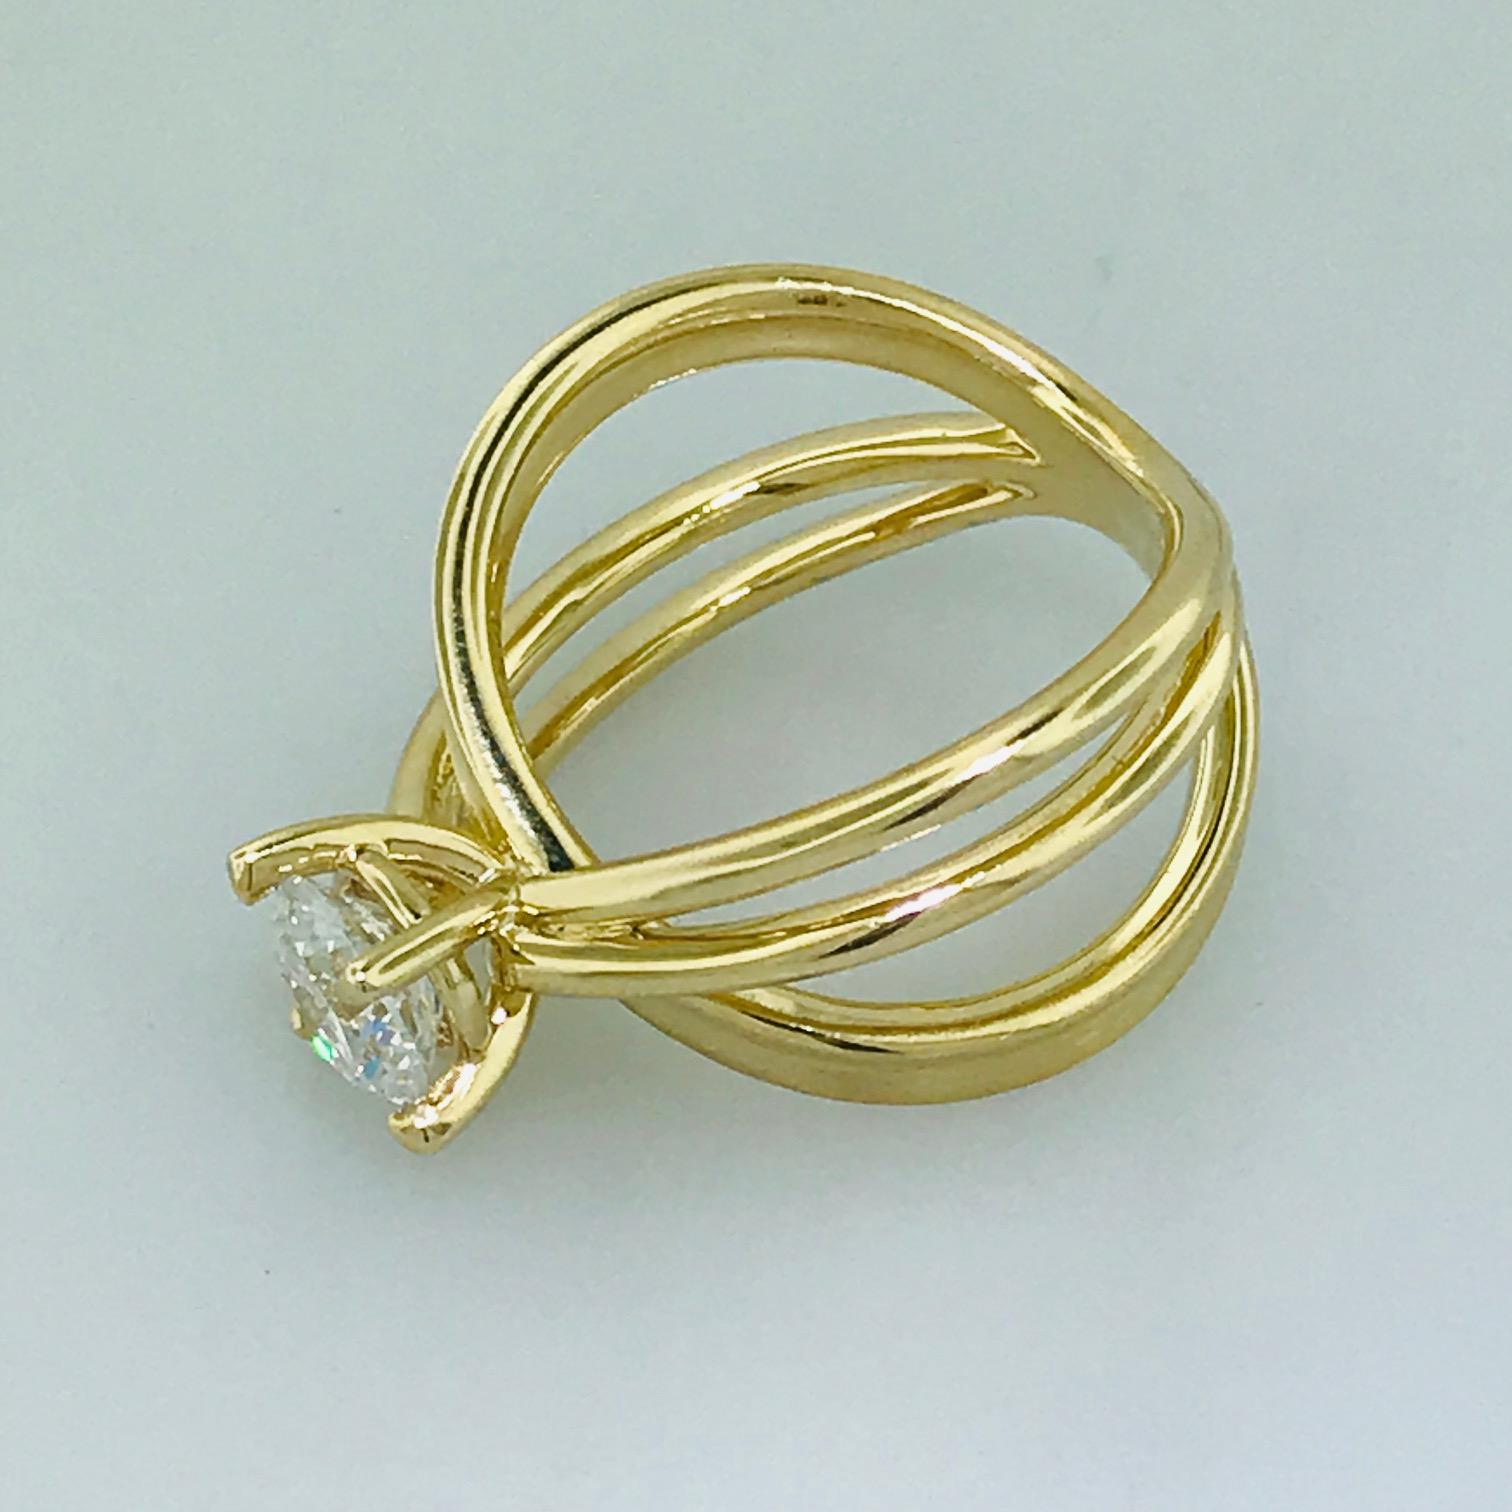 1.00 Carat X Design Solitaire Satin and Polish Ring in 14 Karat Yellow Gold For Sale 2